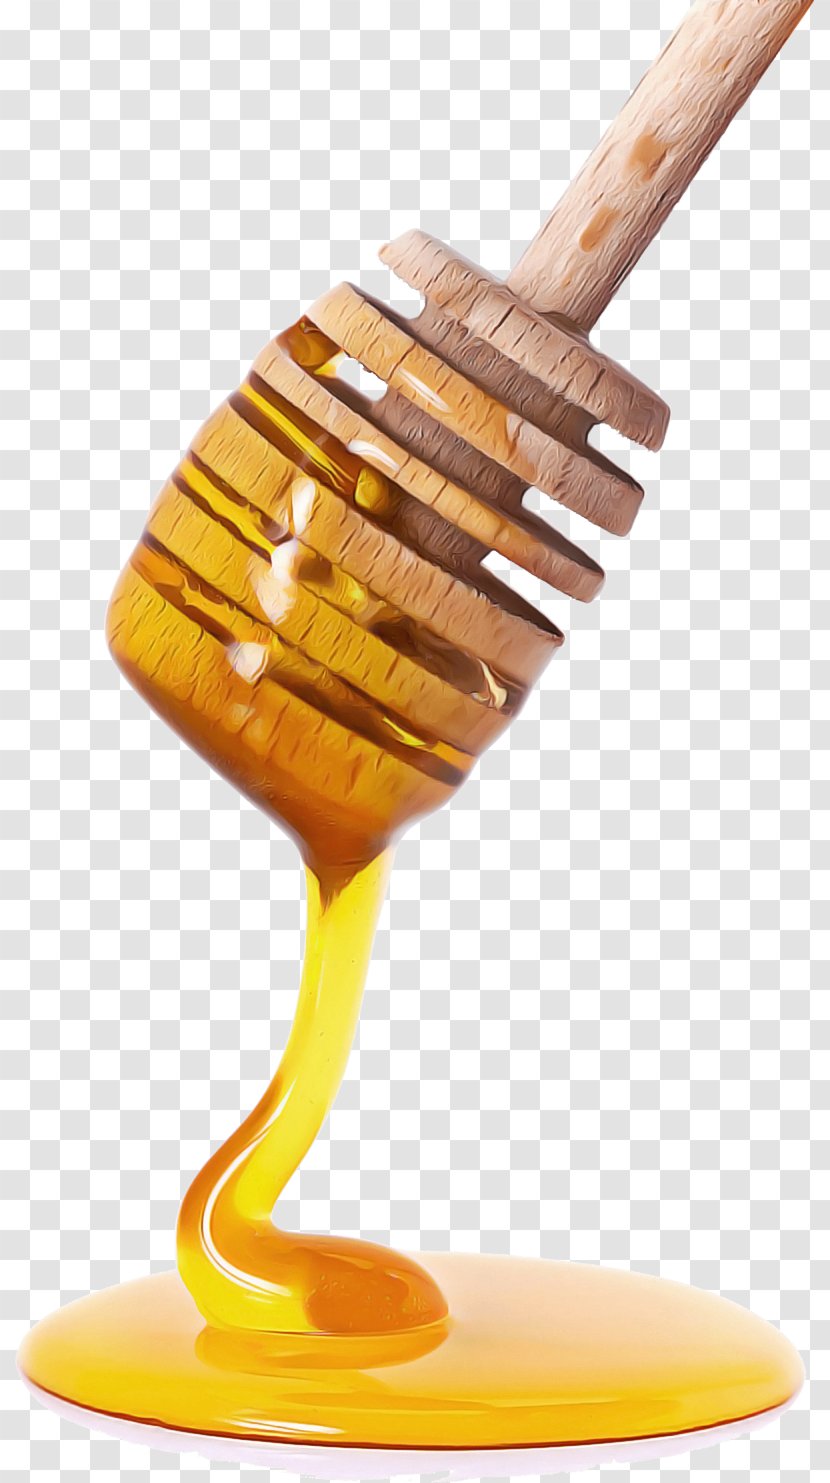 Honey Background - Dripping Comb Transparent PNG